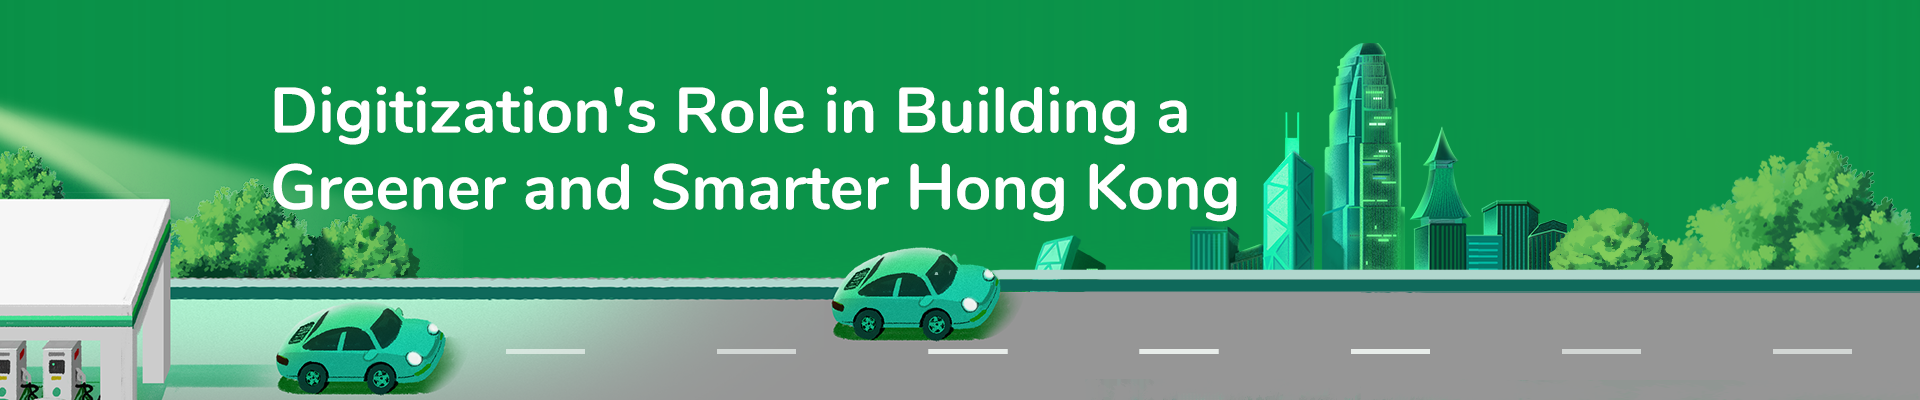 Digitization’s Role in Building a Greener and Smarter Hong Kong